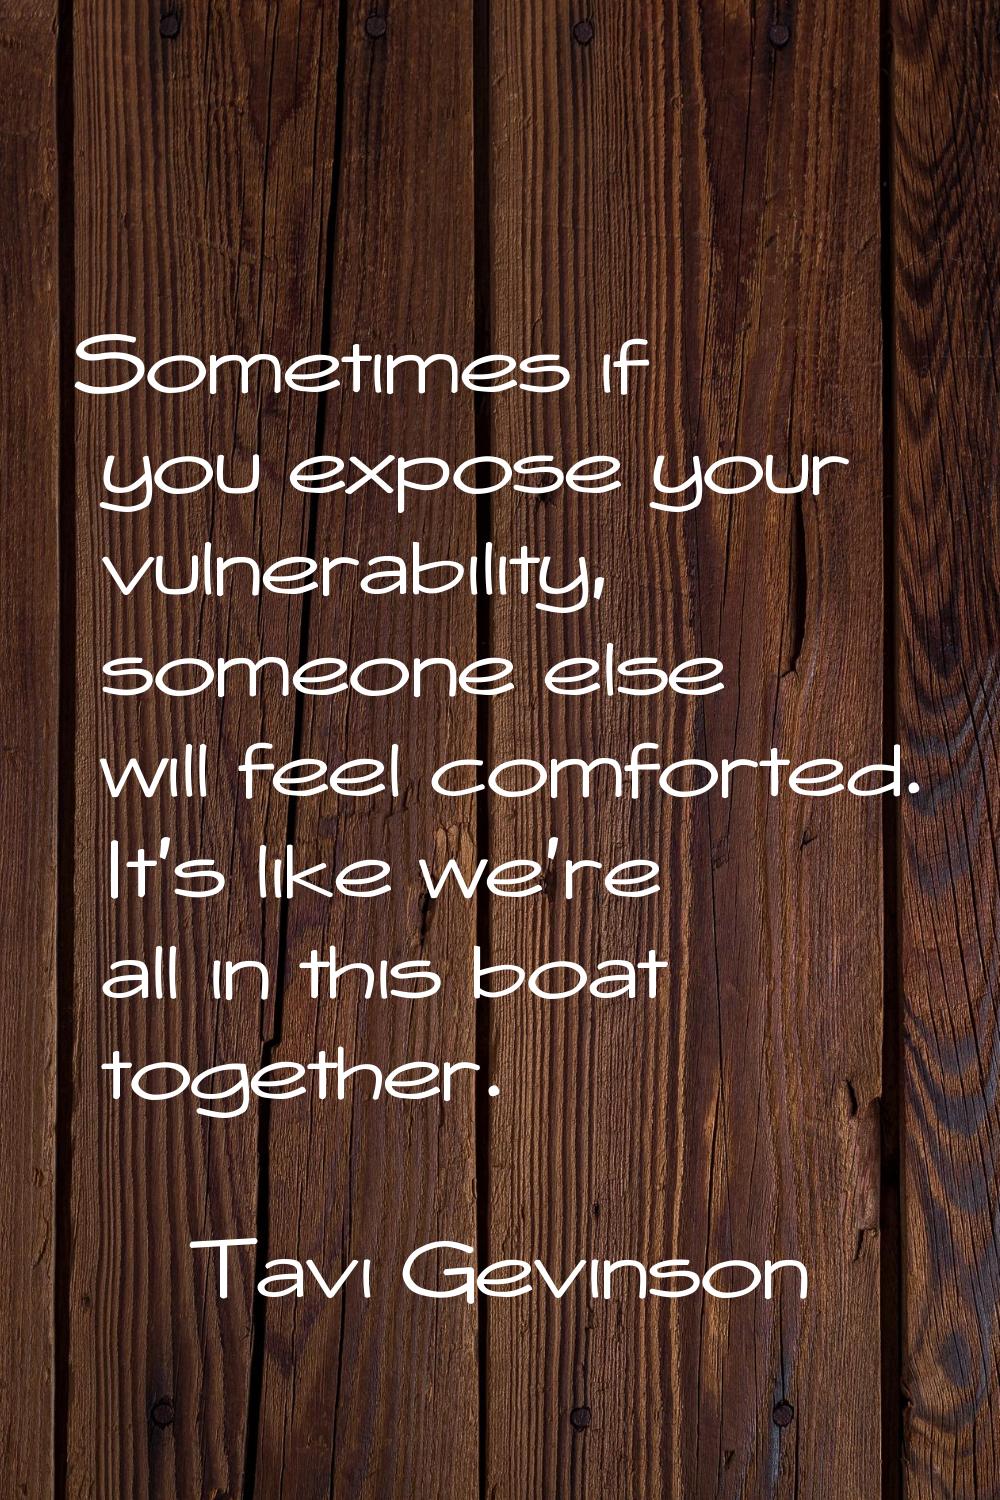 Sometimes if you expose your vulnerability, someone else will feel comforted. It's like we're all i